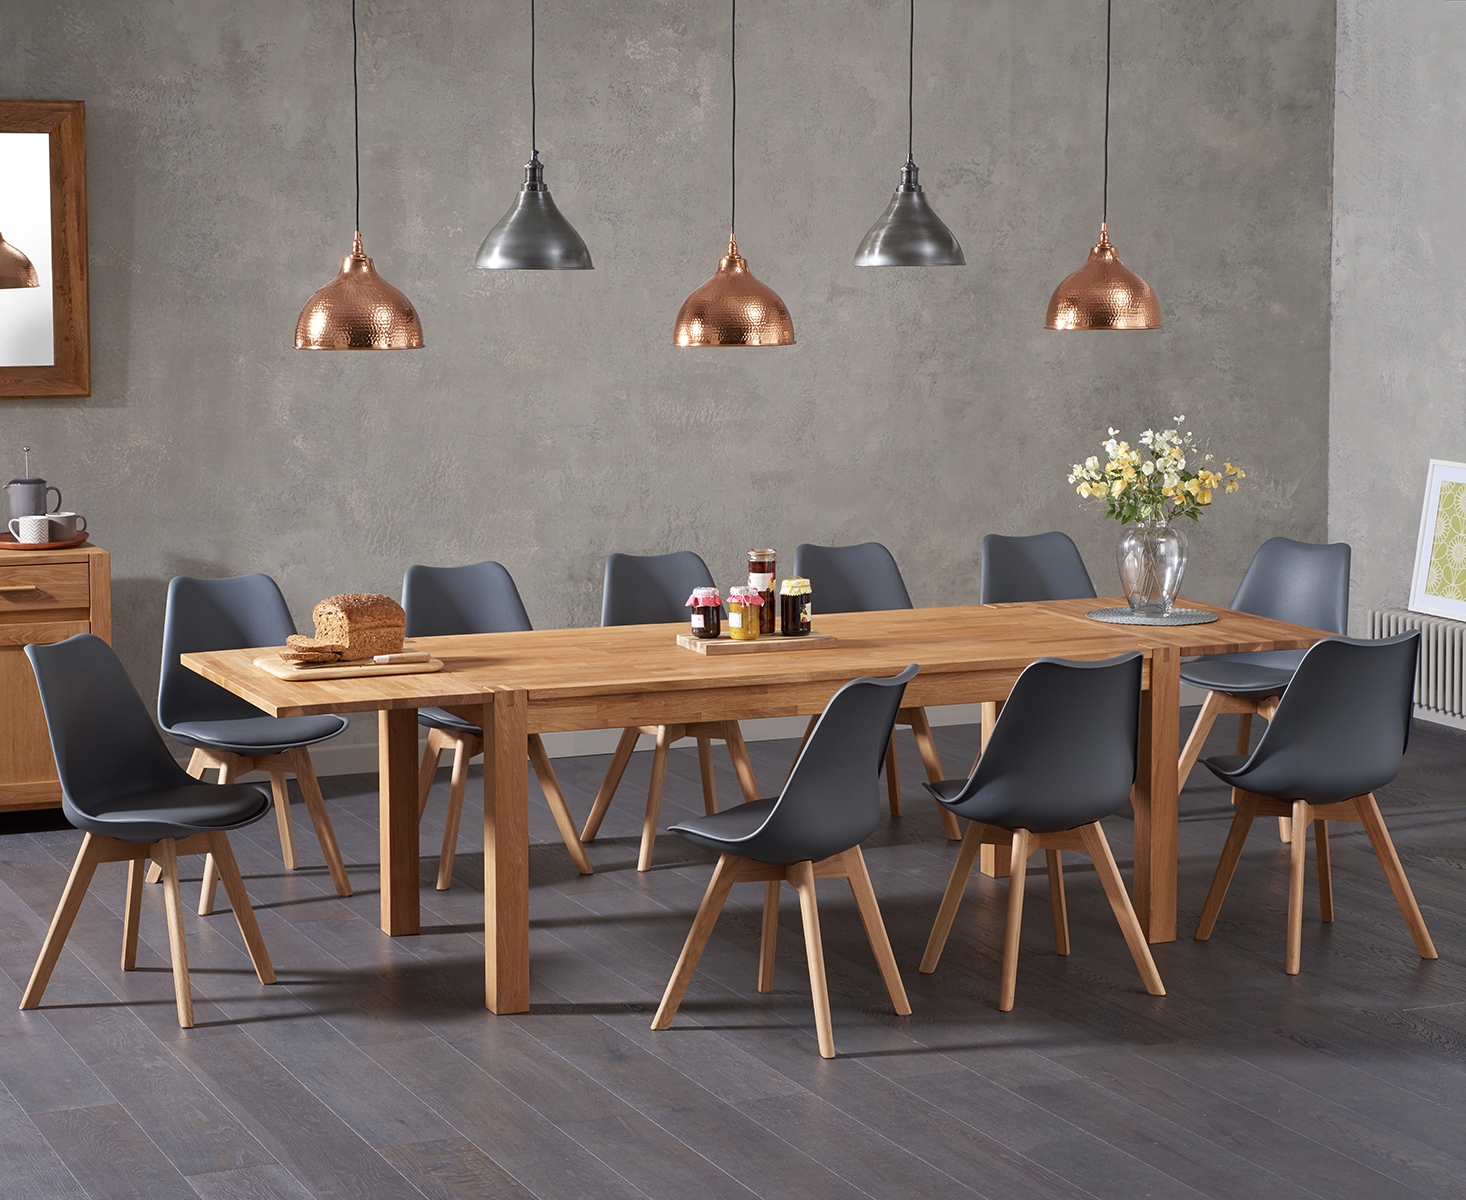 Verona 180cm Solid Oak Extending Dining Table With Orson Faux Leather Chairs